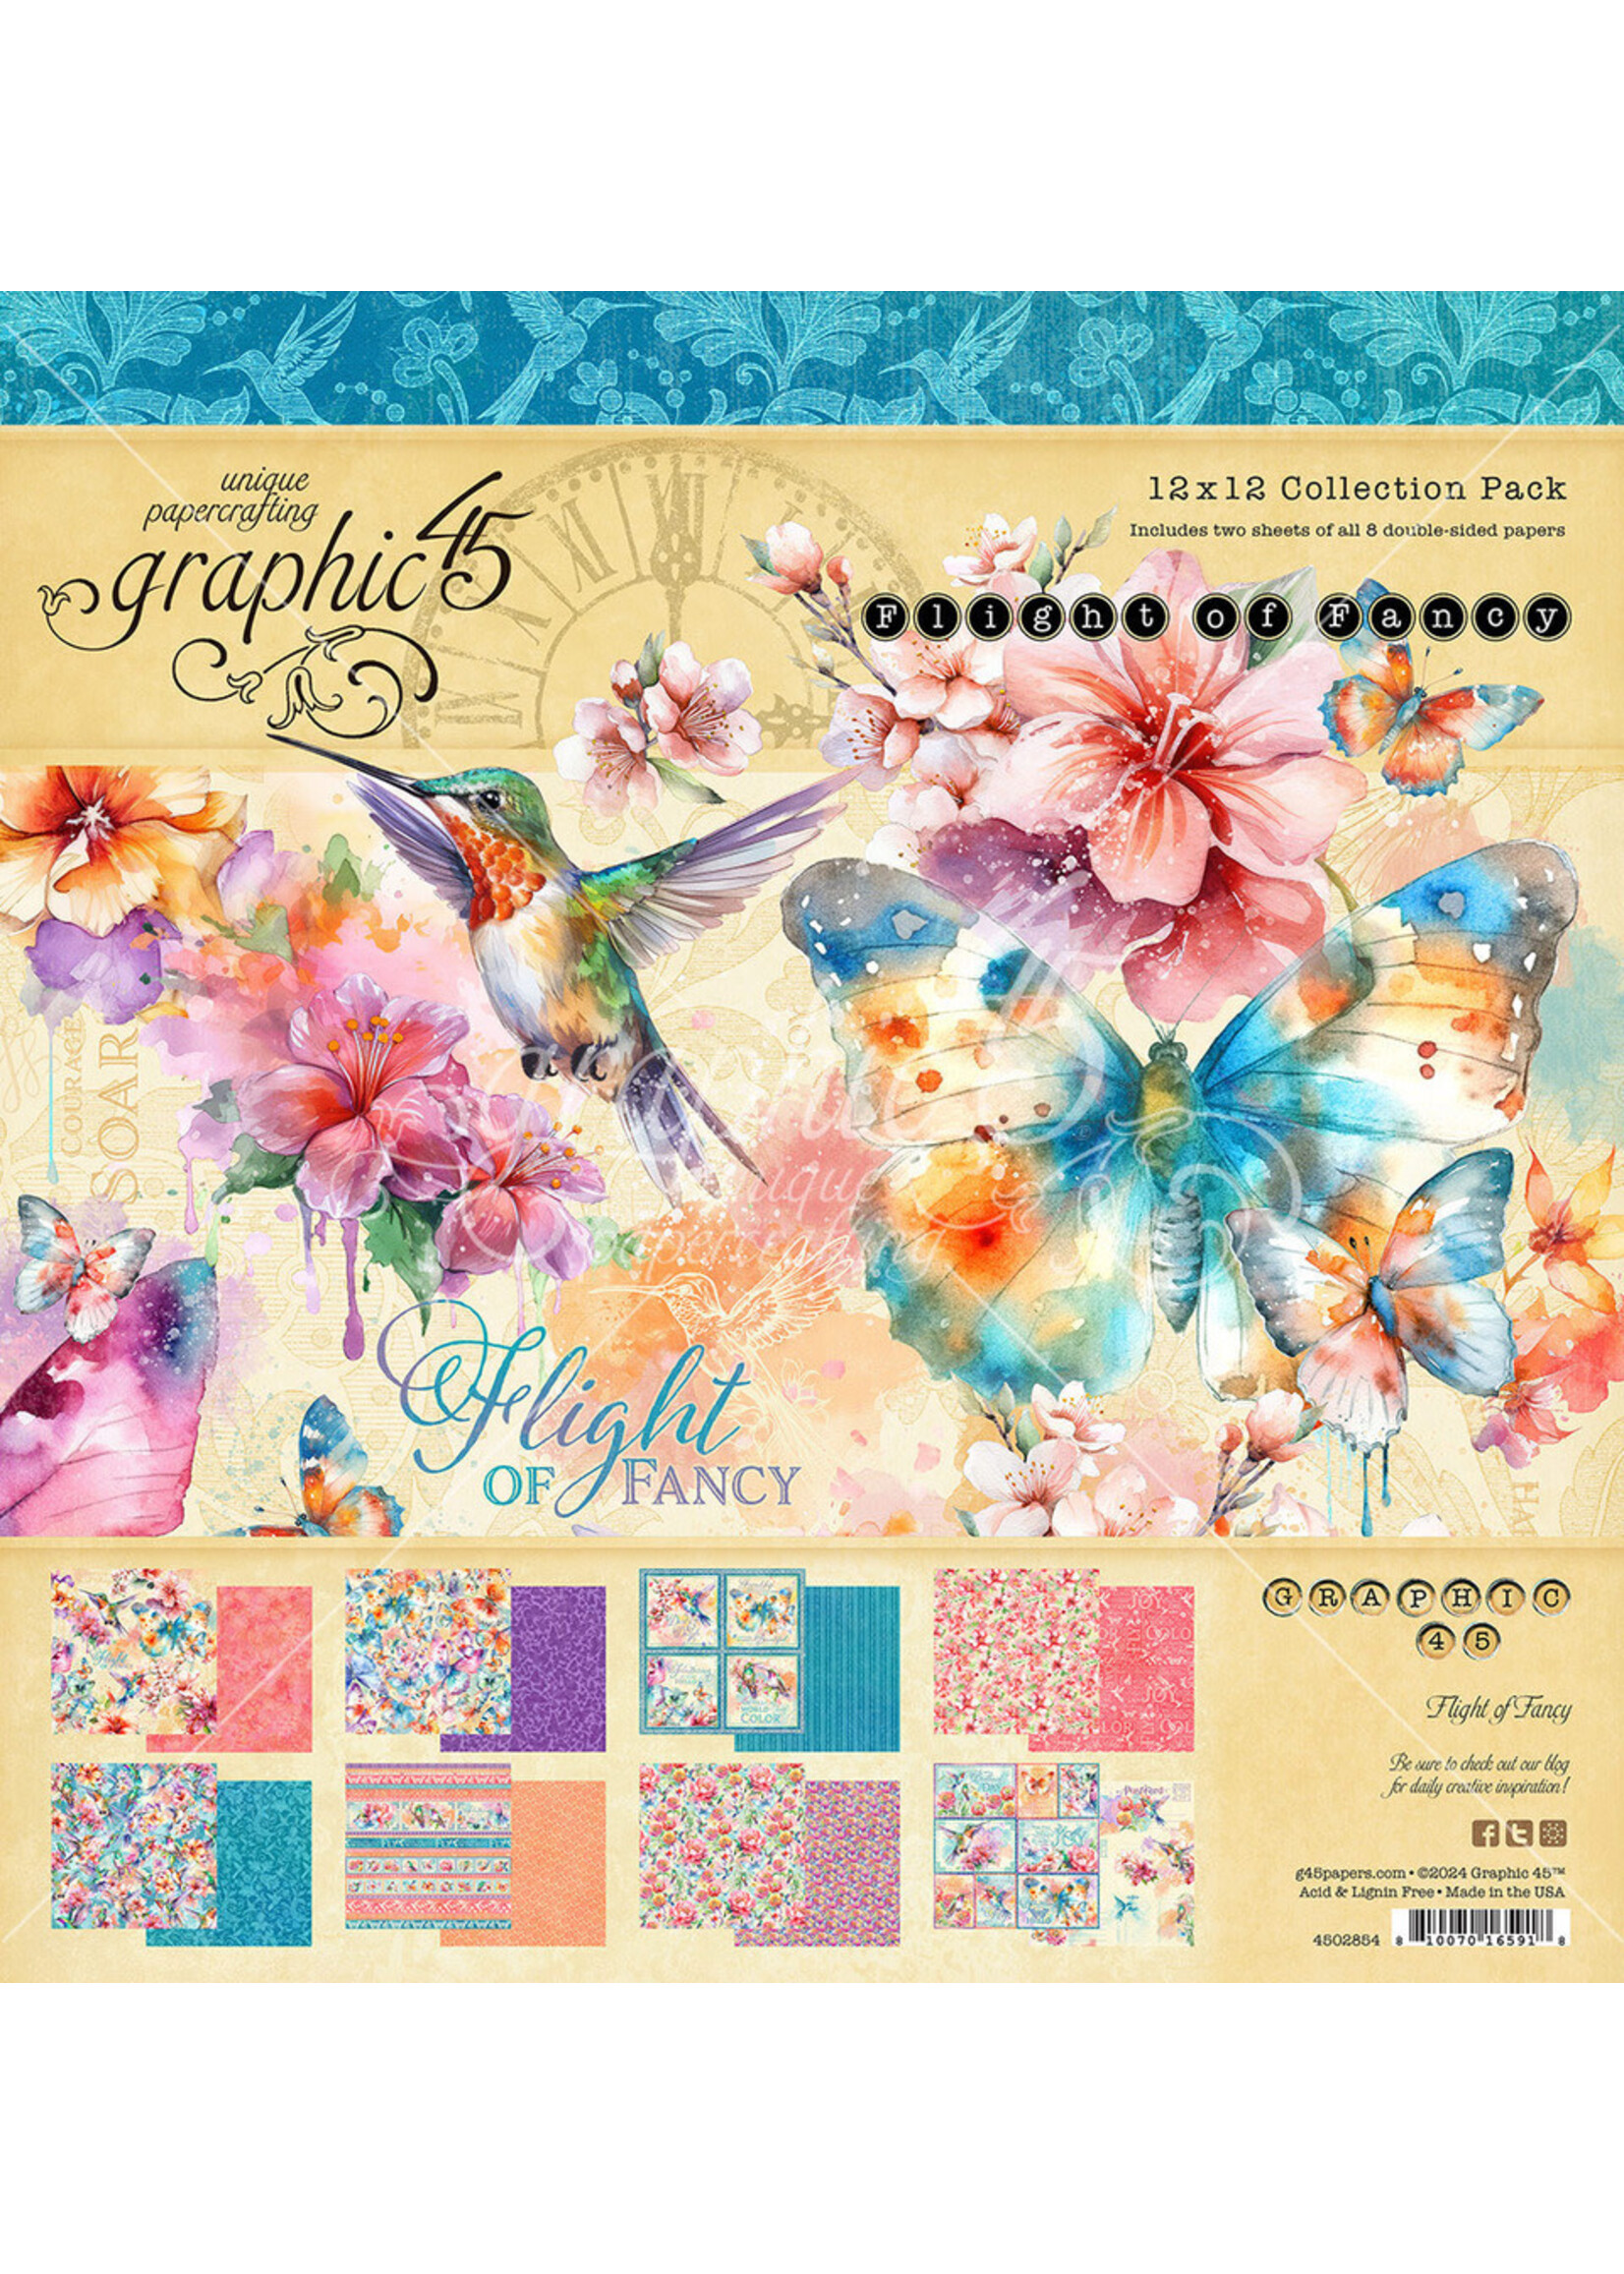 Graphic 45 12x12 Collection Pack, Flight of Fancy